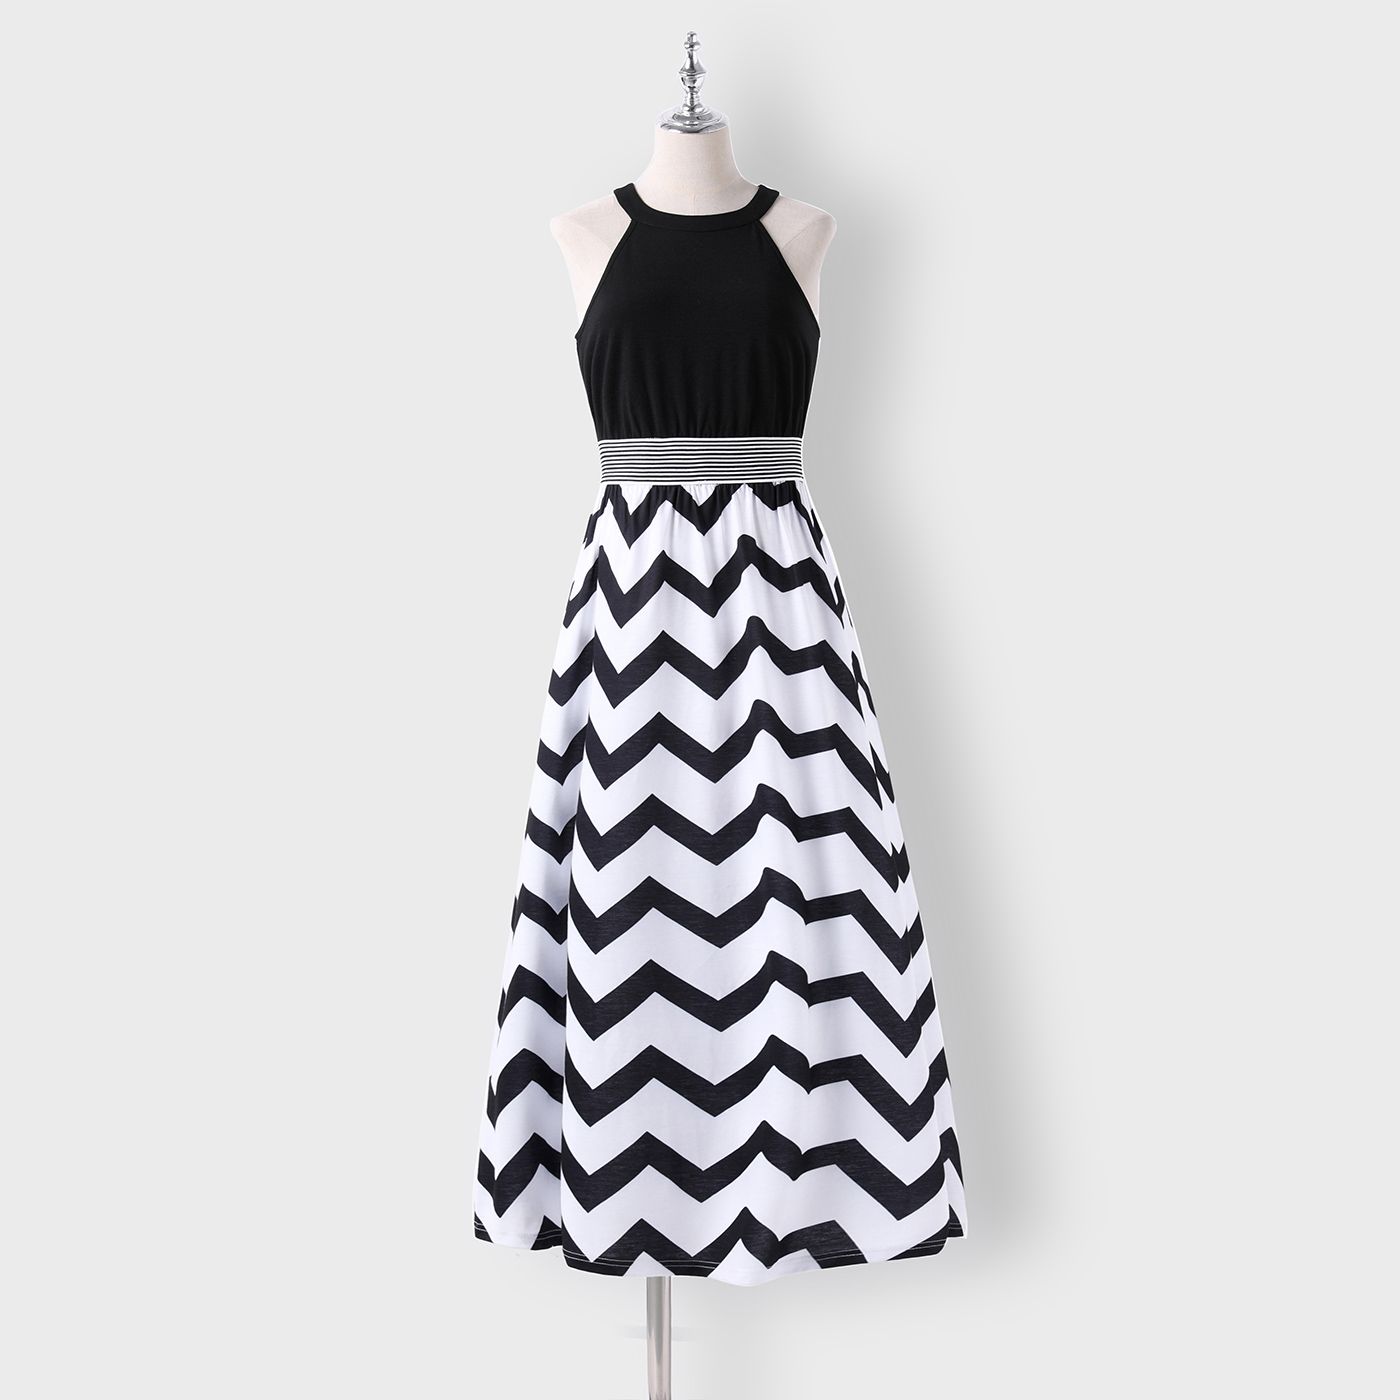 Family Matching Black Halter Neck Off Shoulder Splicing Chevron Striped Maxi Dresses And Short-sleeve T-shirts Sets